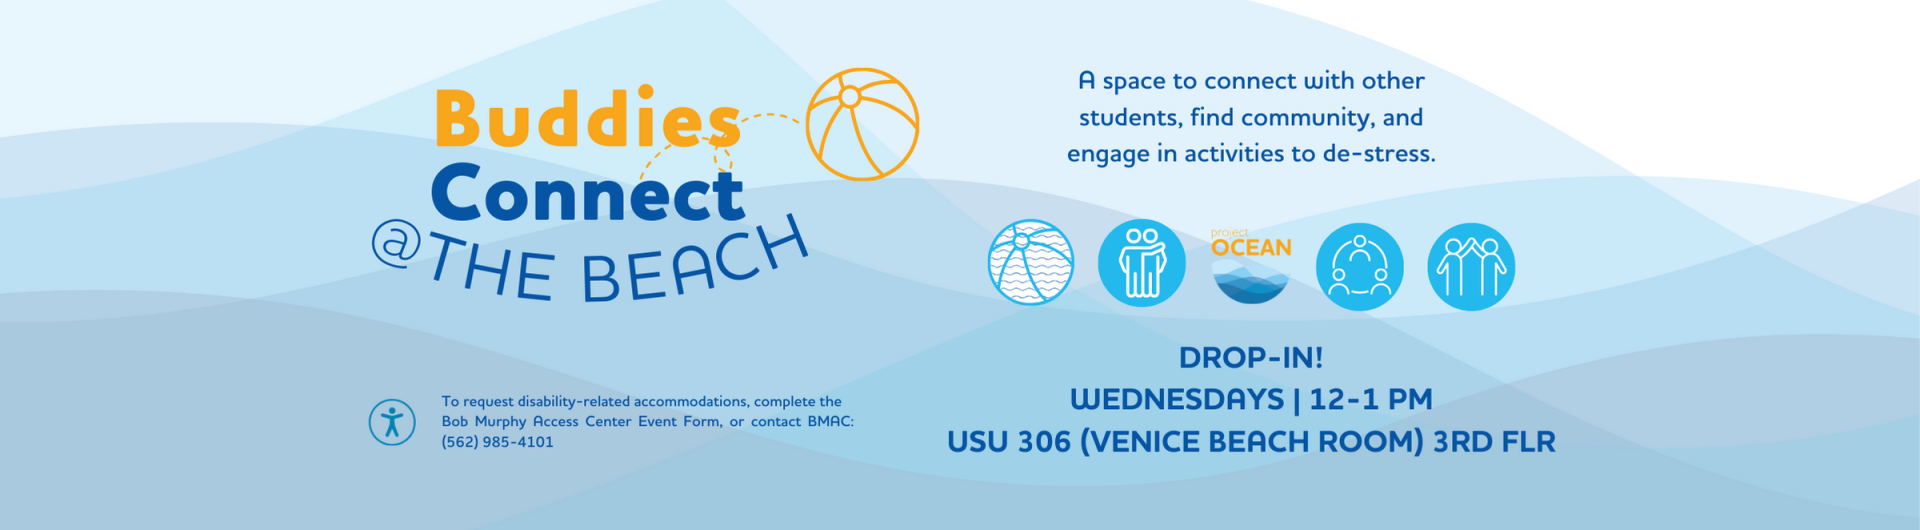 buddies connect at the beach on Wednesdays at USU 306 from 12 to 1pm